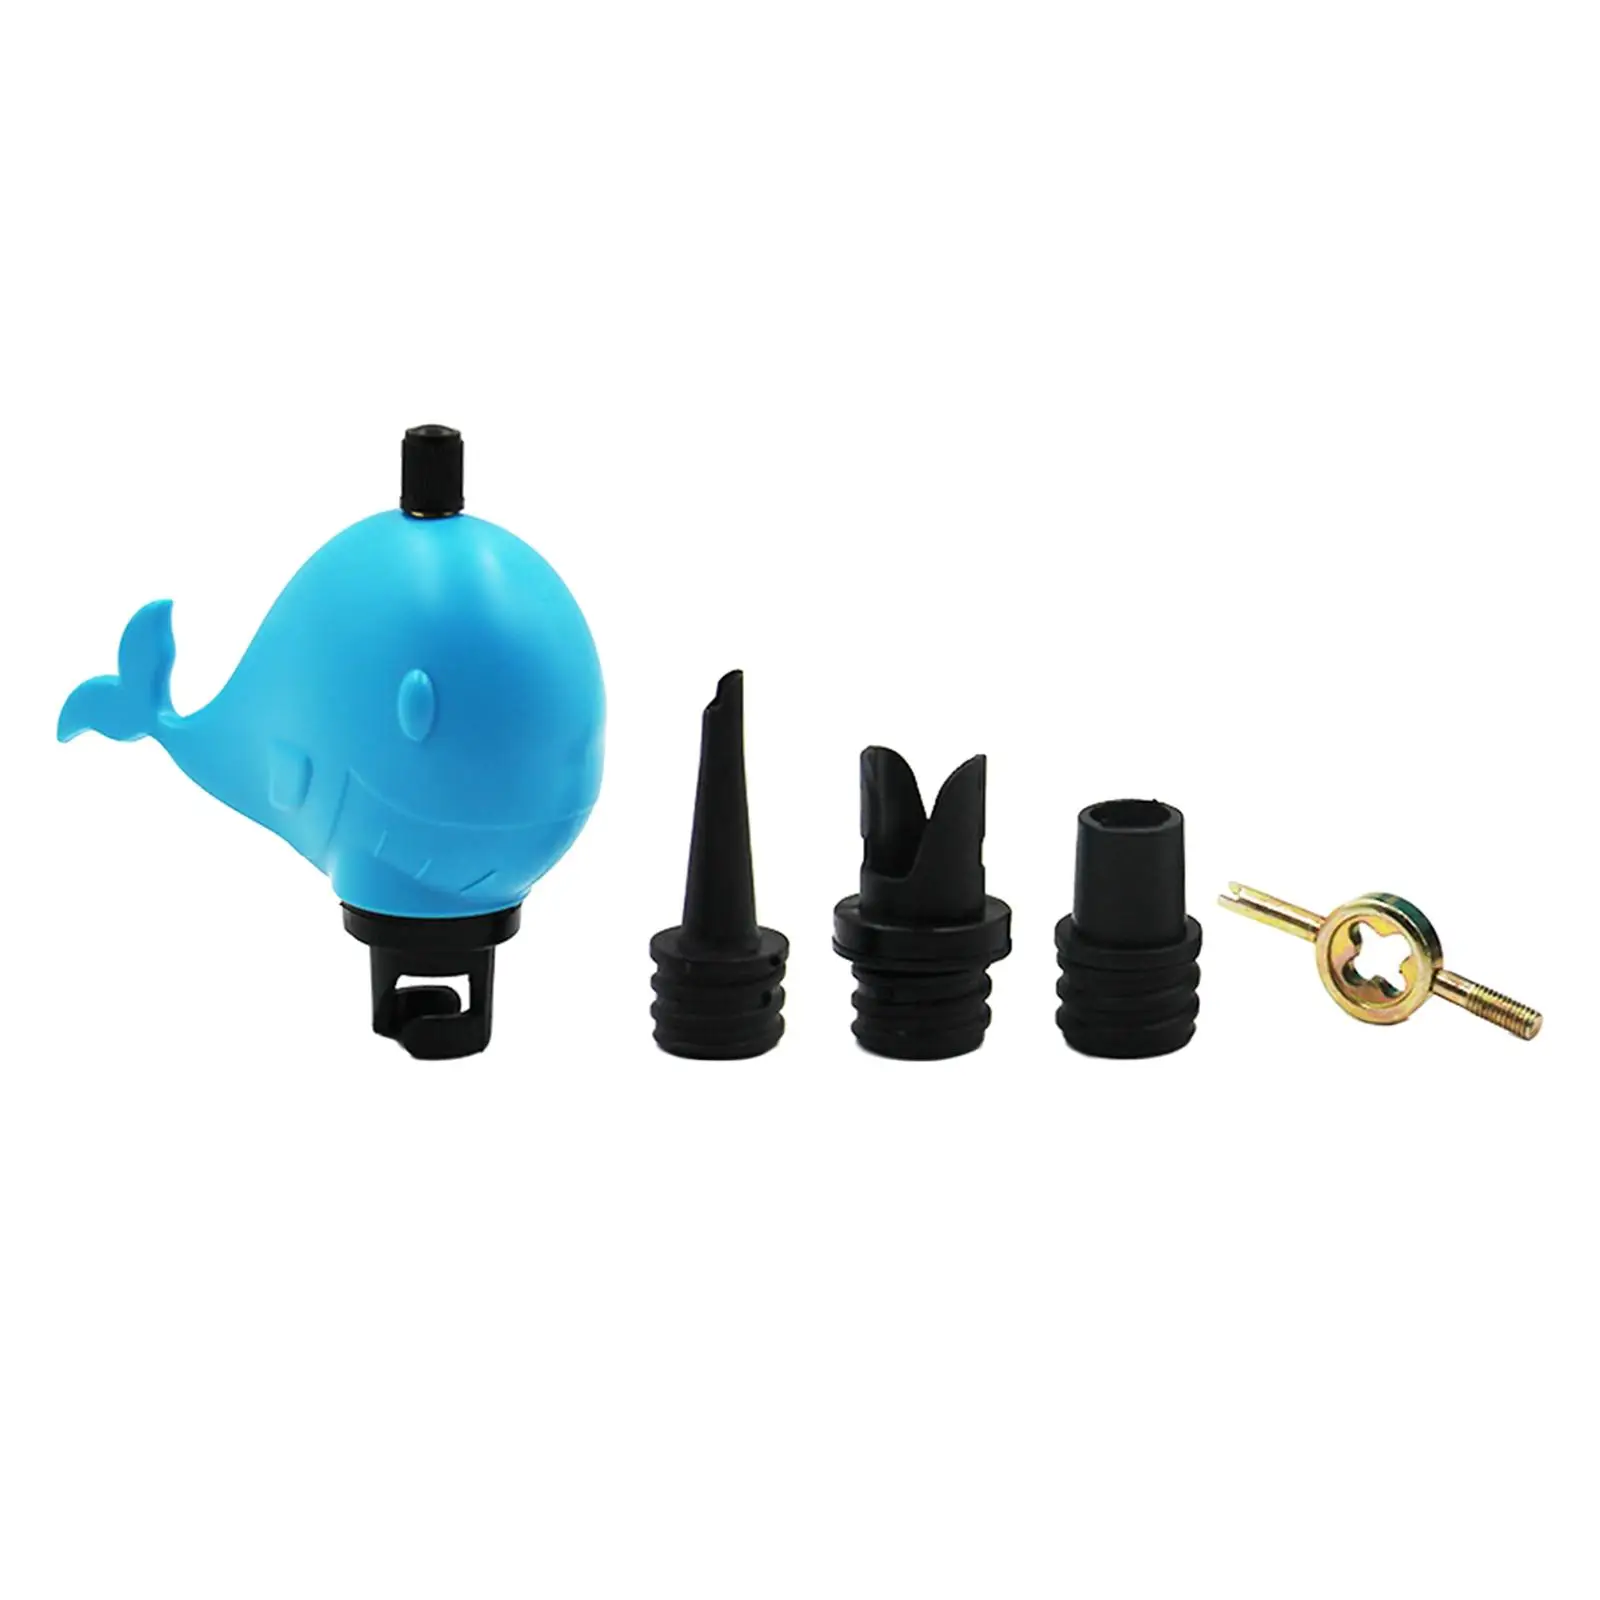 Pump Adaptor Lightweight Replacement Inflatable Boat Pump Adaptor for Dinghy Rubber Boats Canoe Paddle Board Accessories